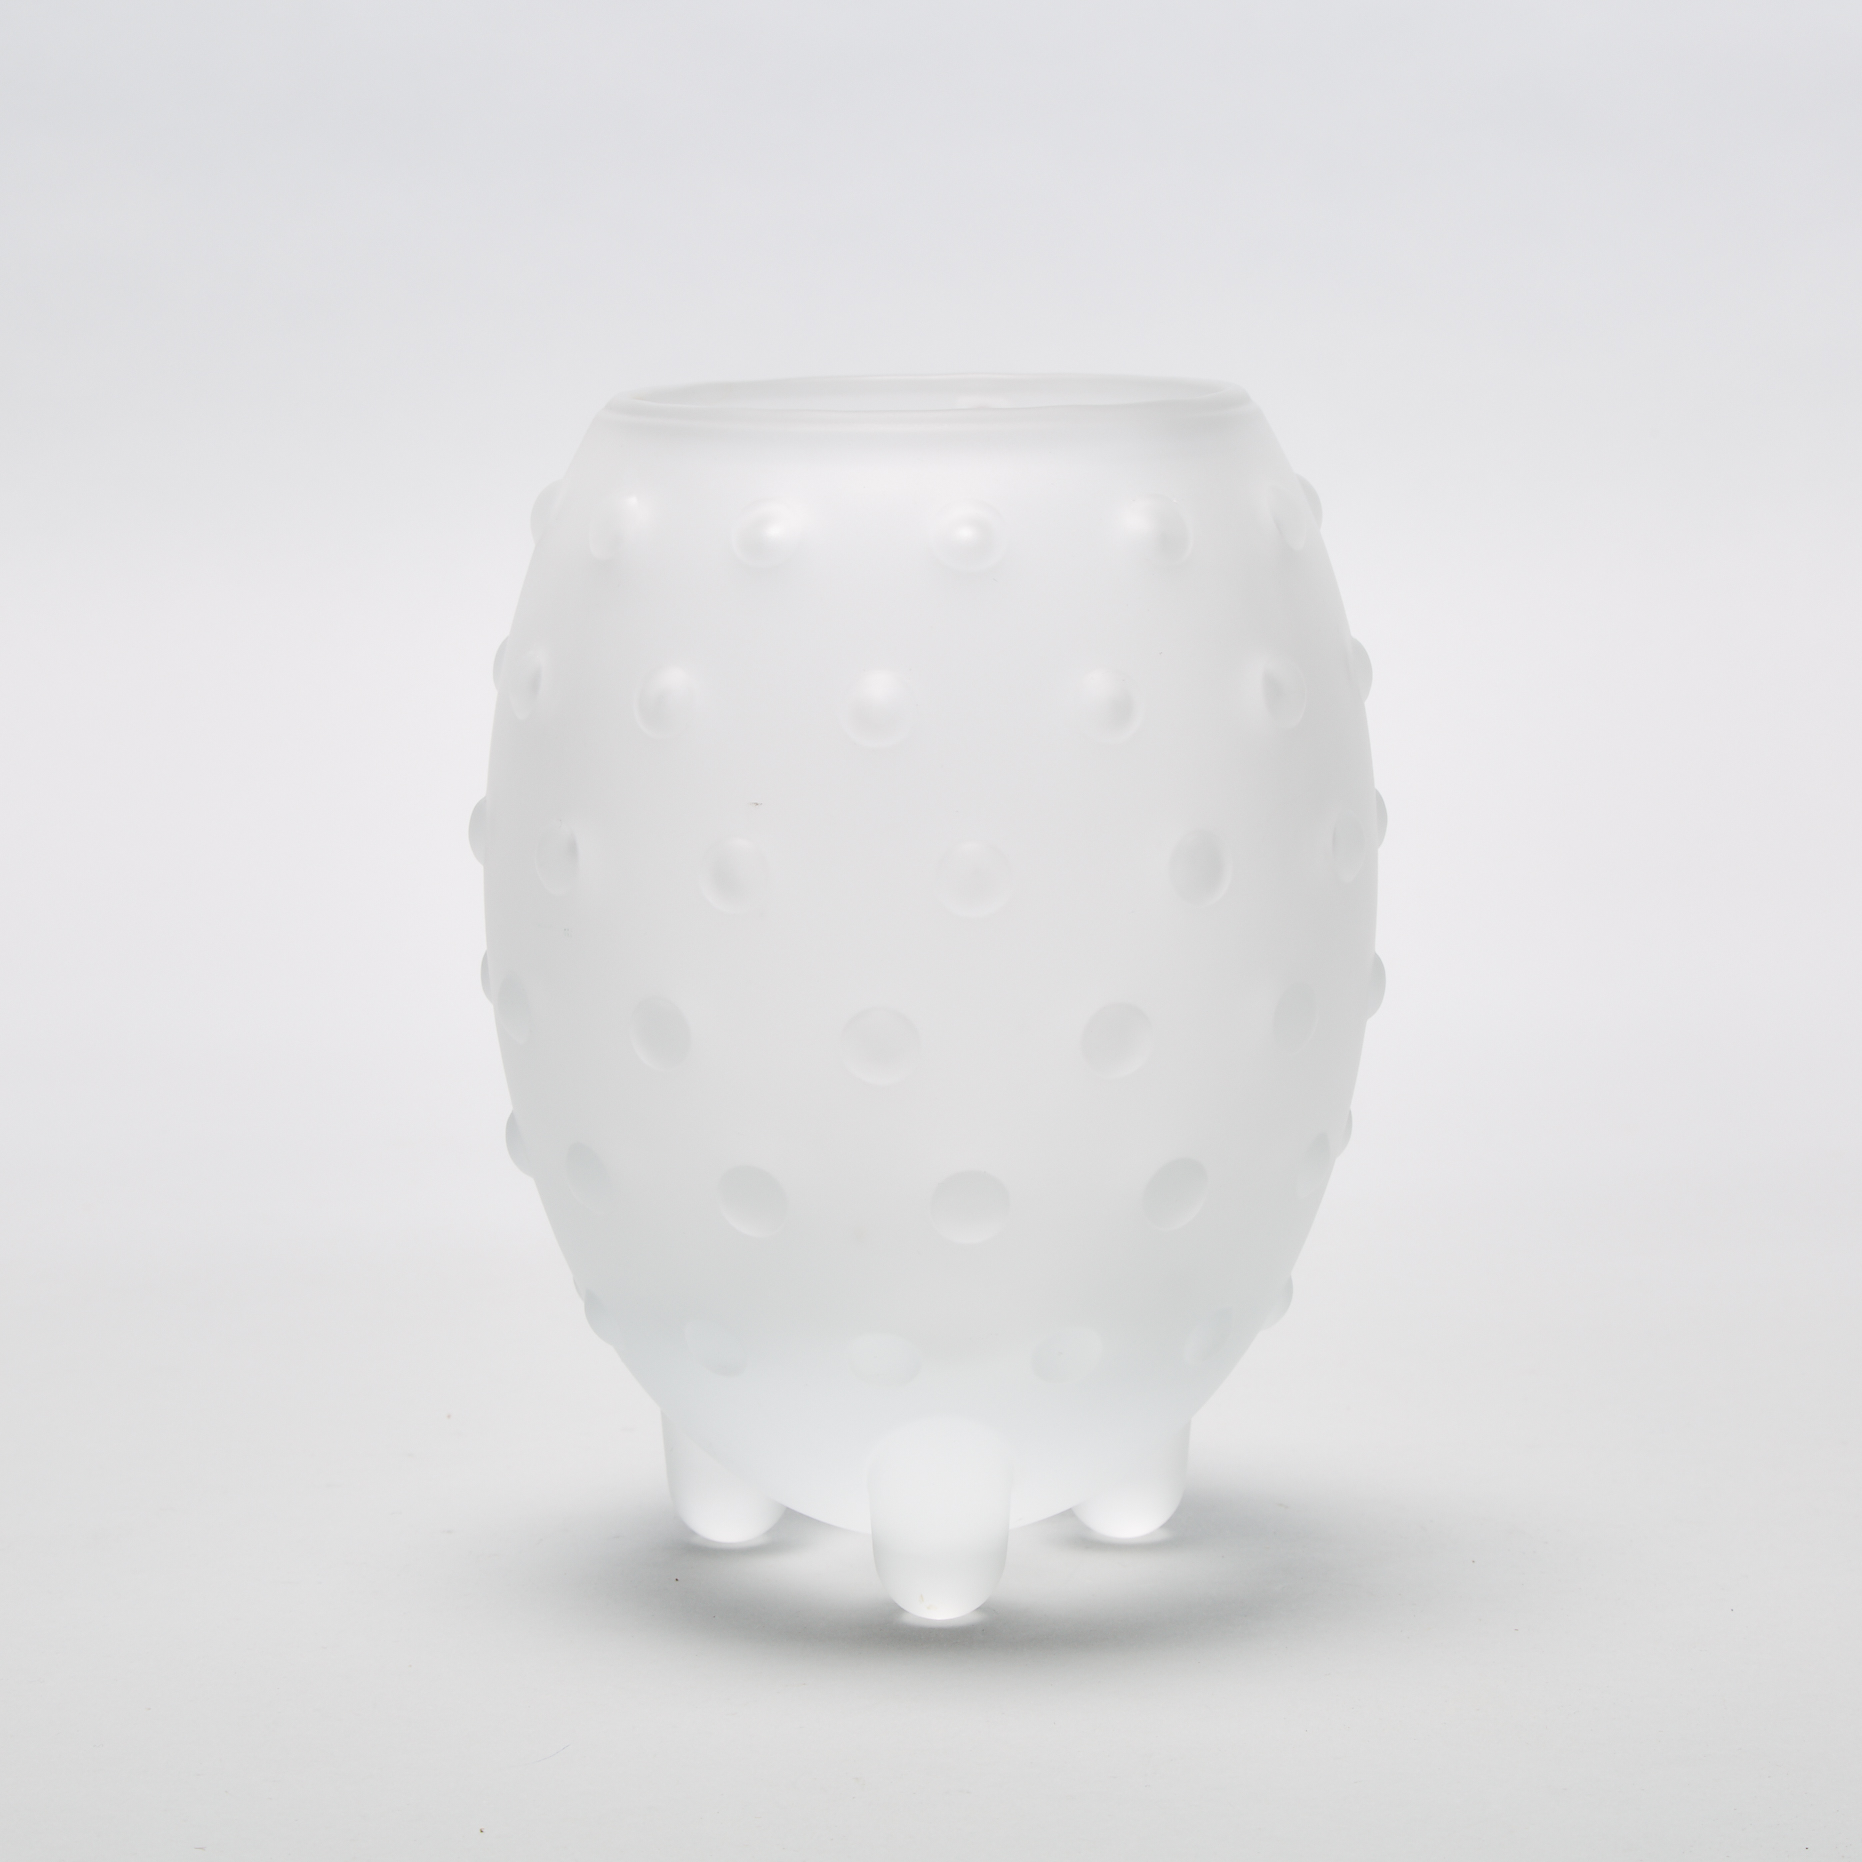 Iittala Moulded and Frosted Glass Vase, late 20th century